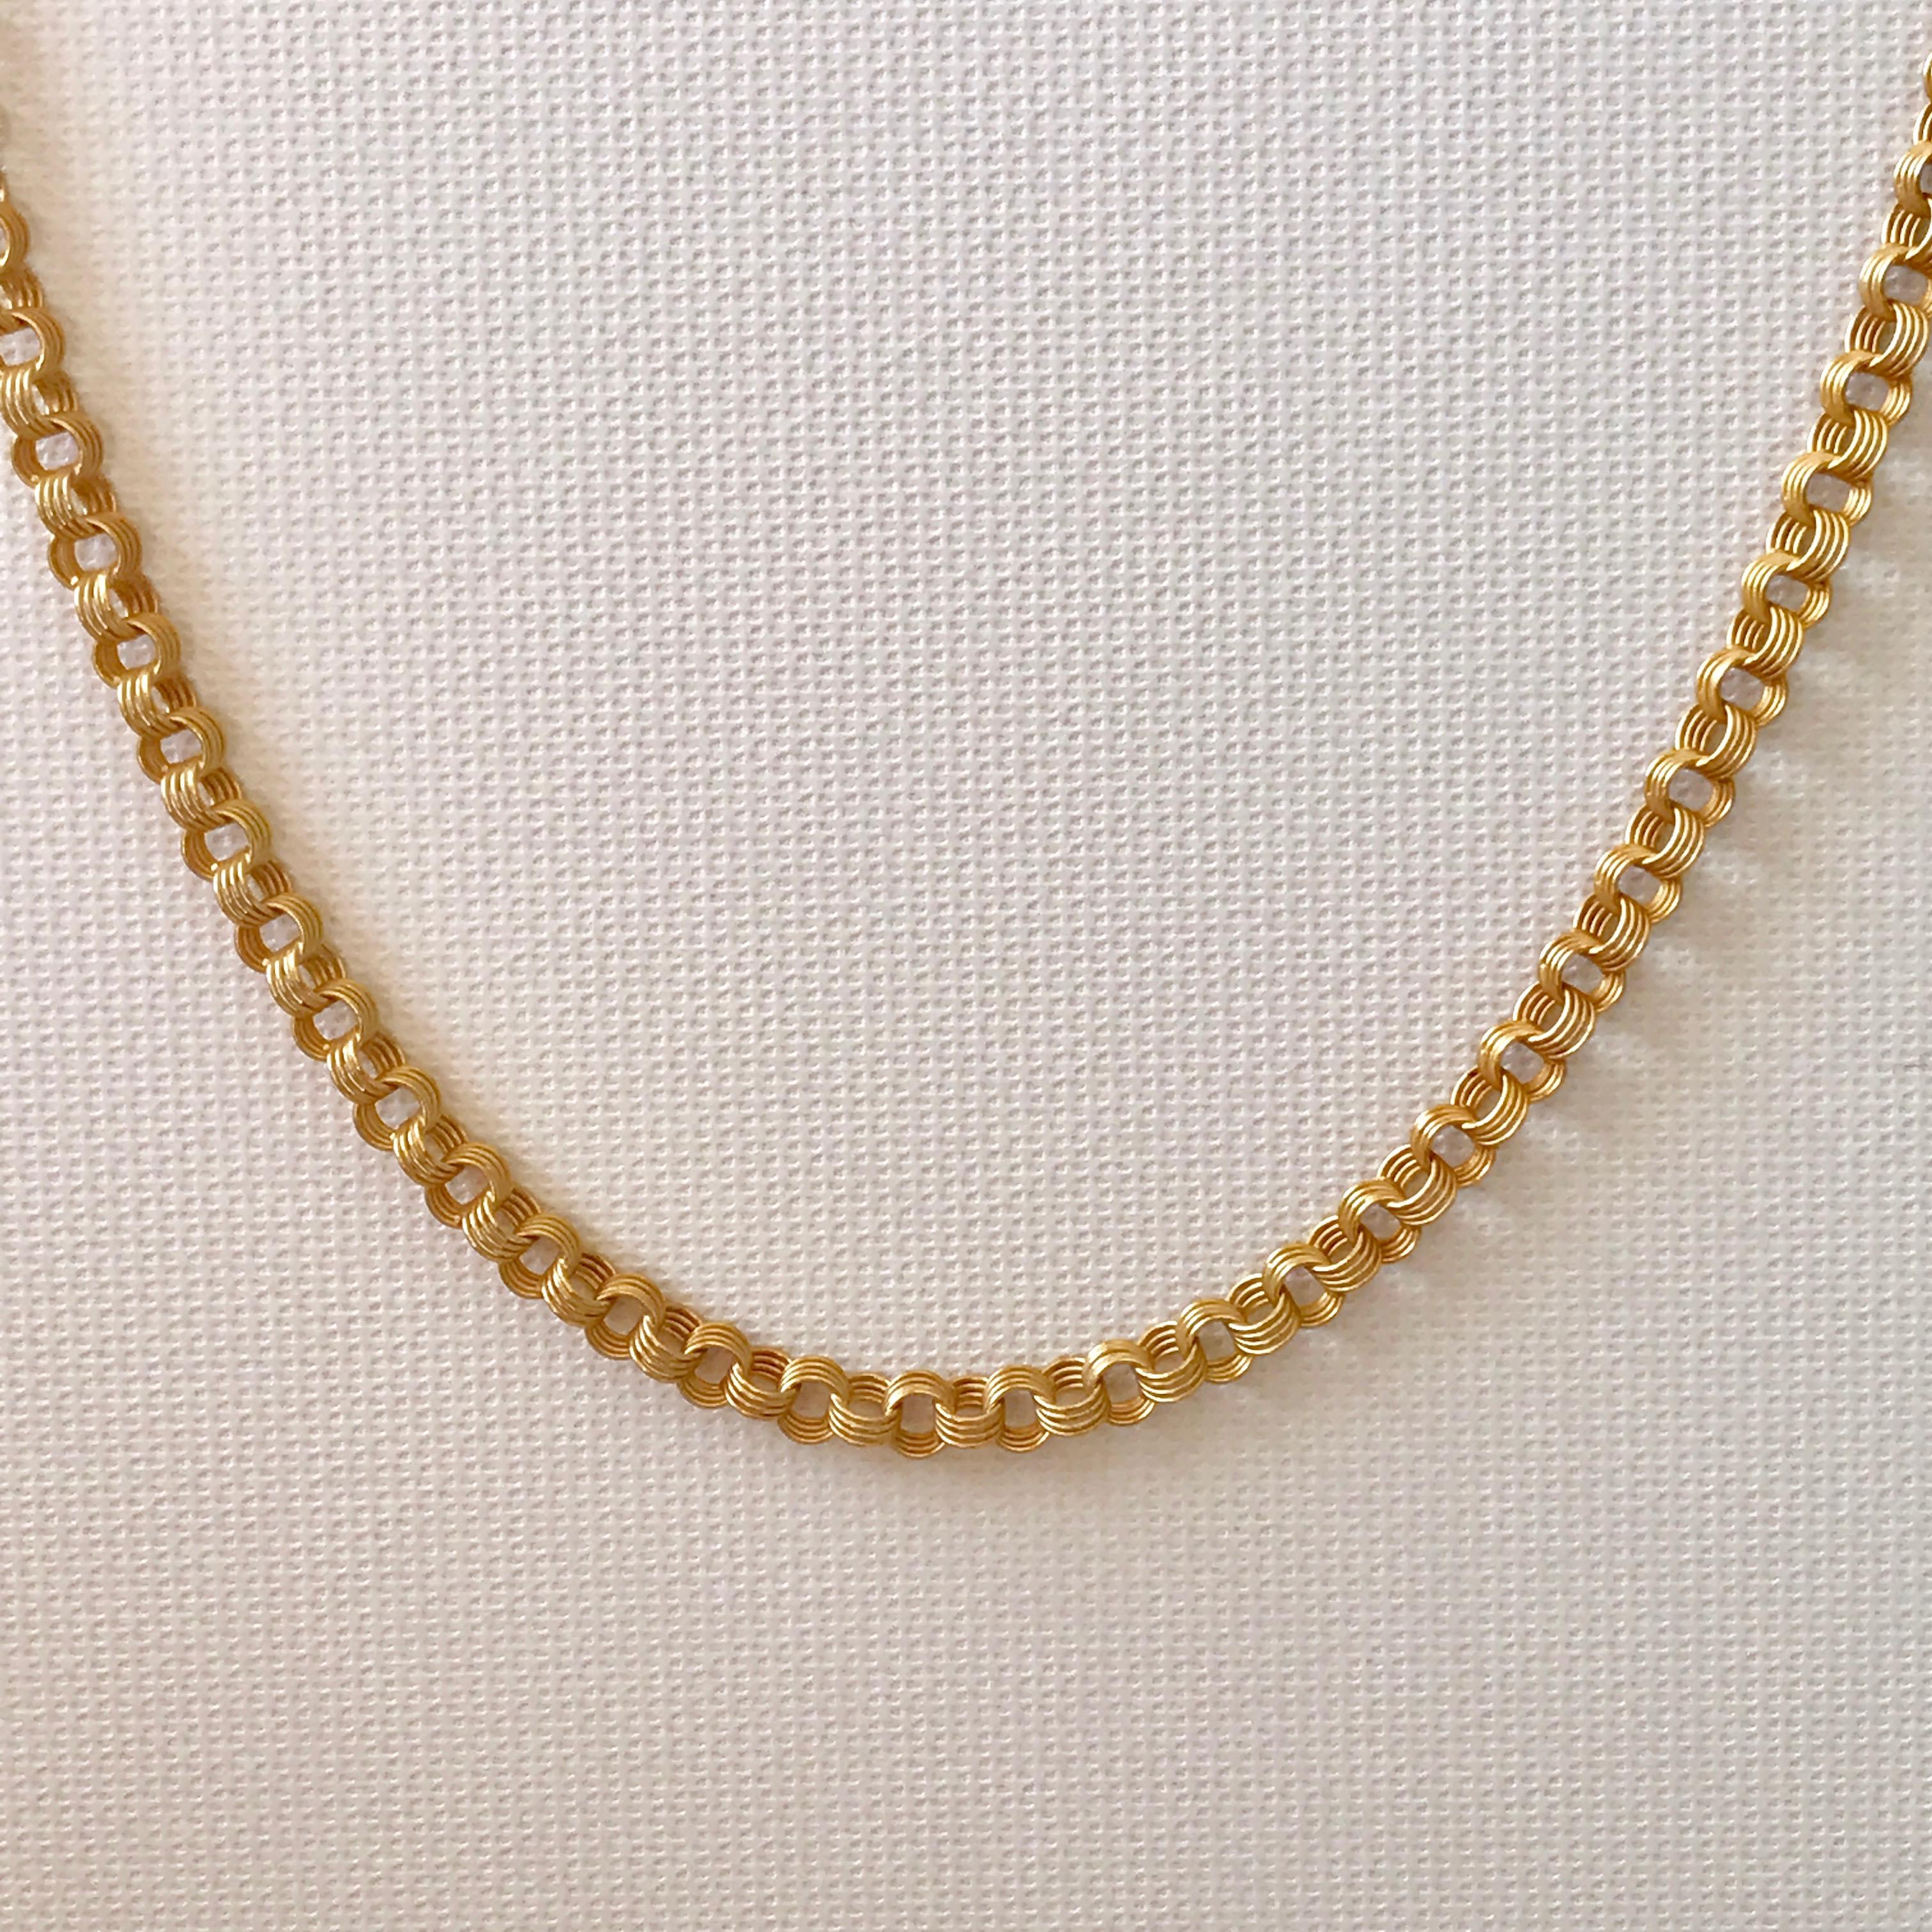 Handmade 18 Karat Solid Yellow Gold Satin Finish Link Chain Necklace  In New Condition For Sale In London, GB